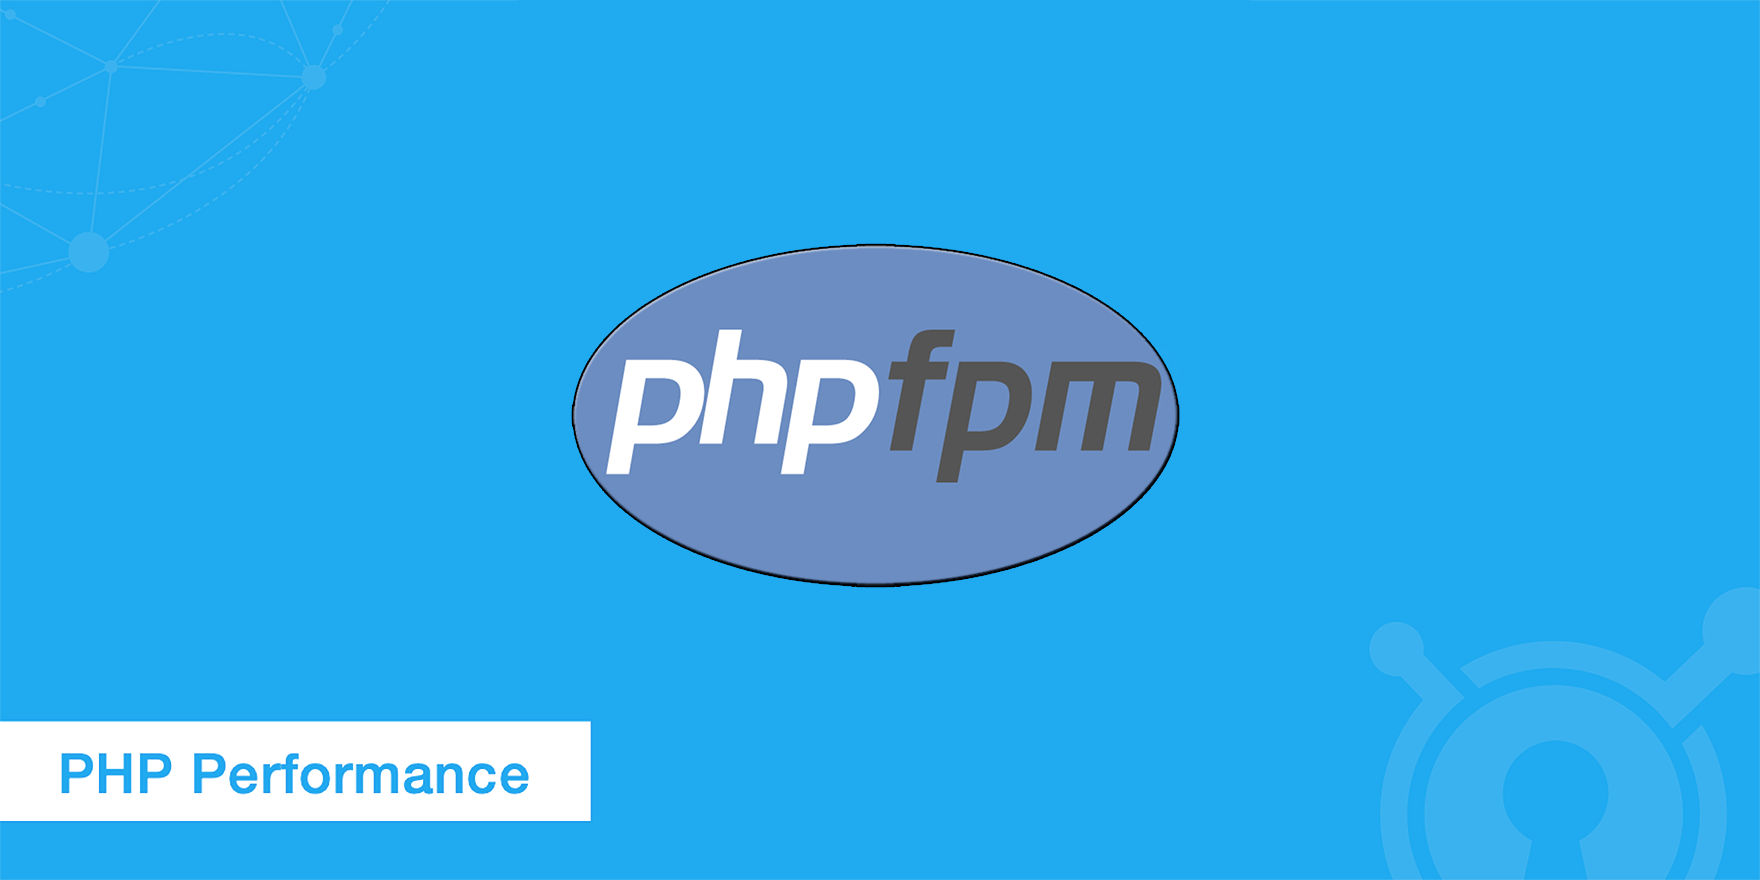 Learn more about Improving PHP Performance w/PHP-FPM